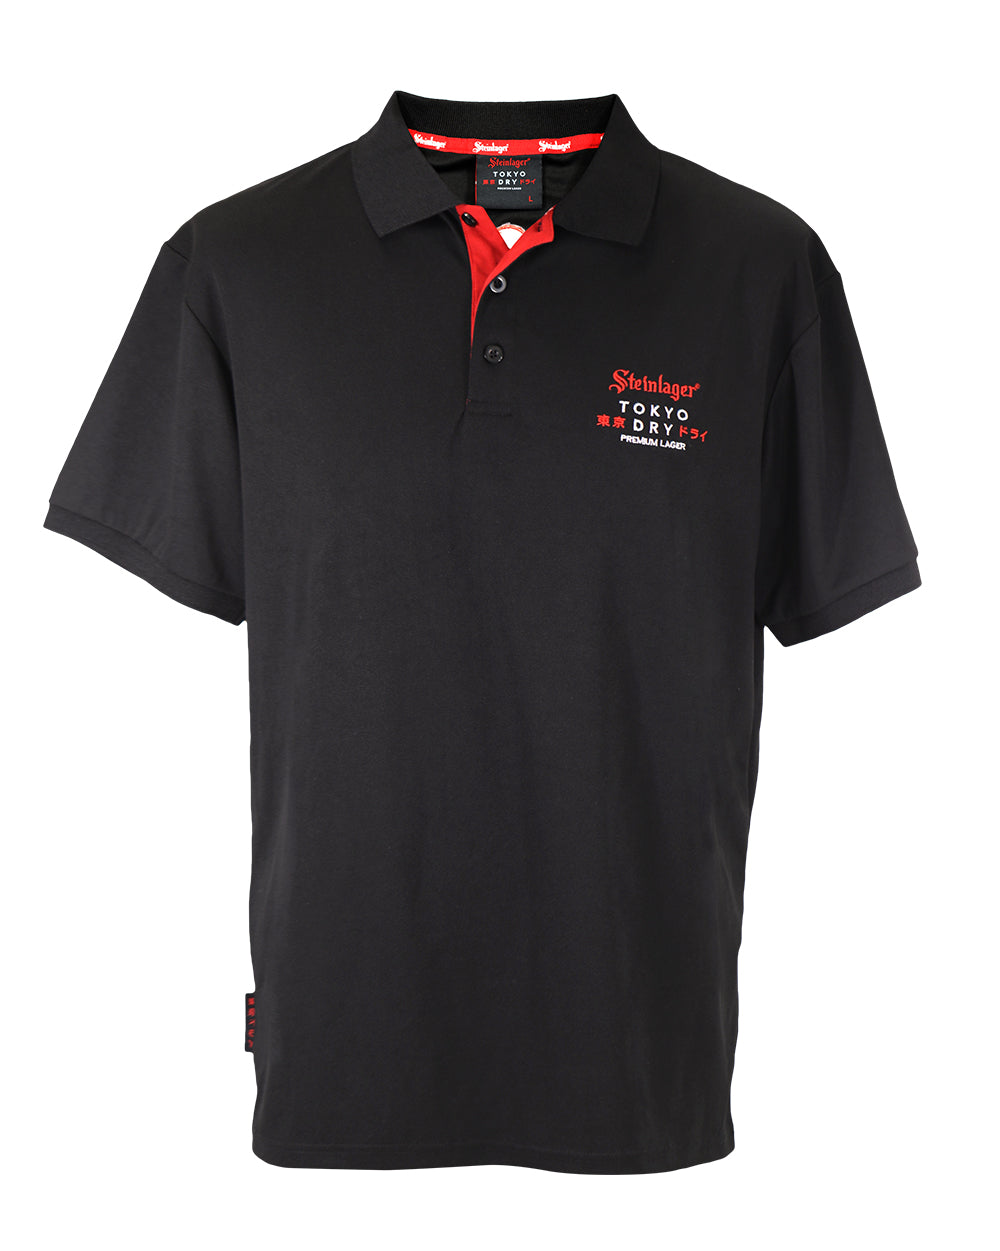 Steinlager Tokyo Dry Drifit Polo -  Beer Gear Apparel & Merchandise - Speights - Lion Red - VB - Tokyo Dy merch